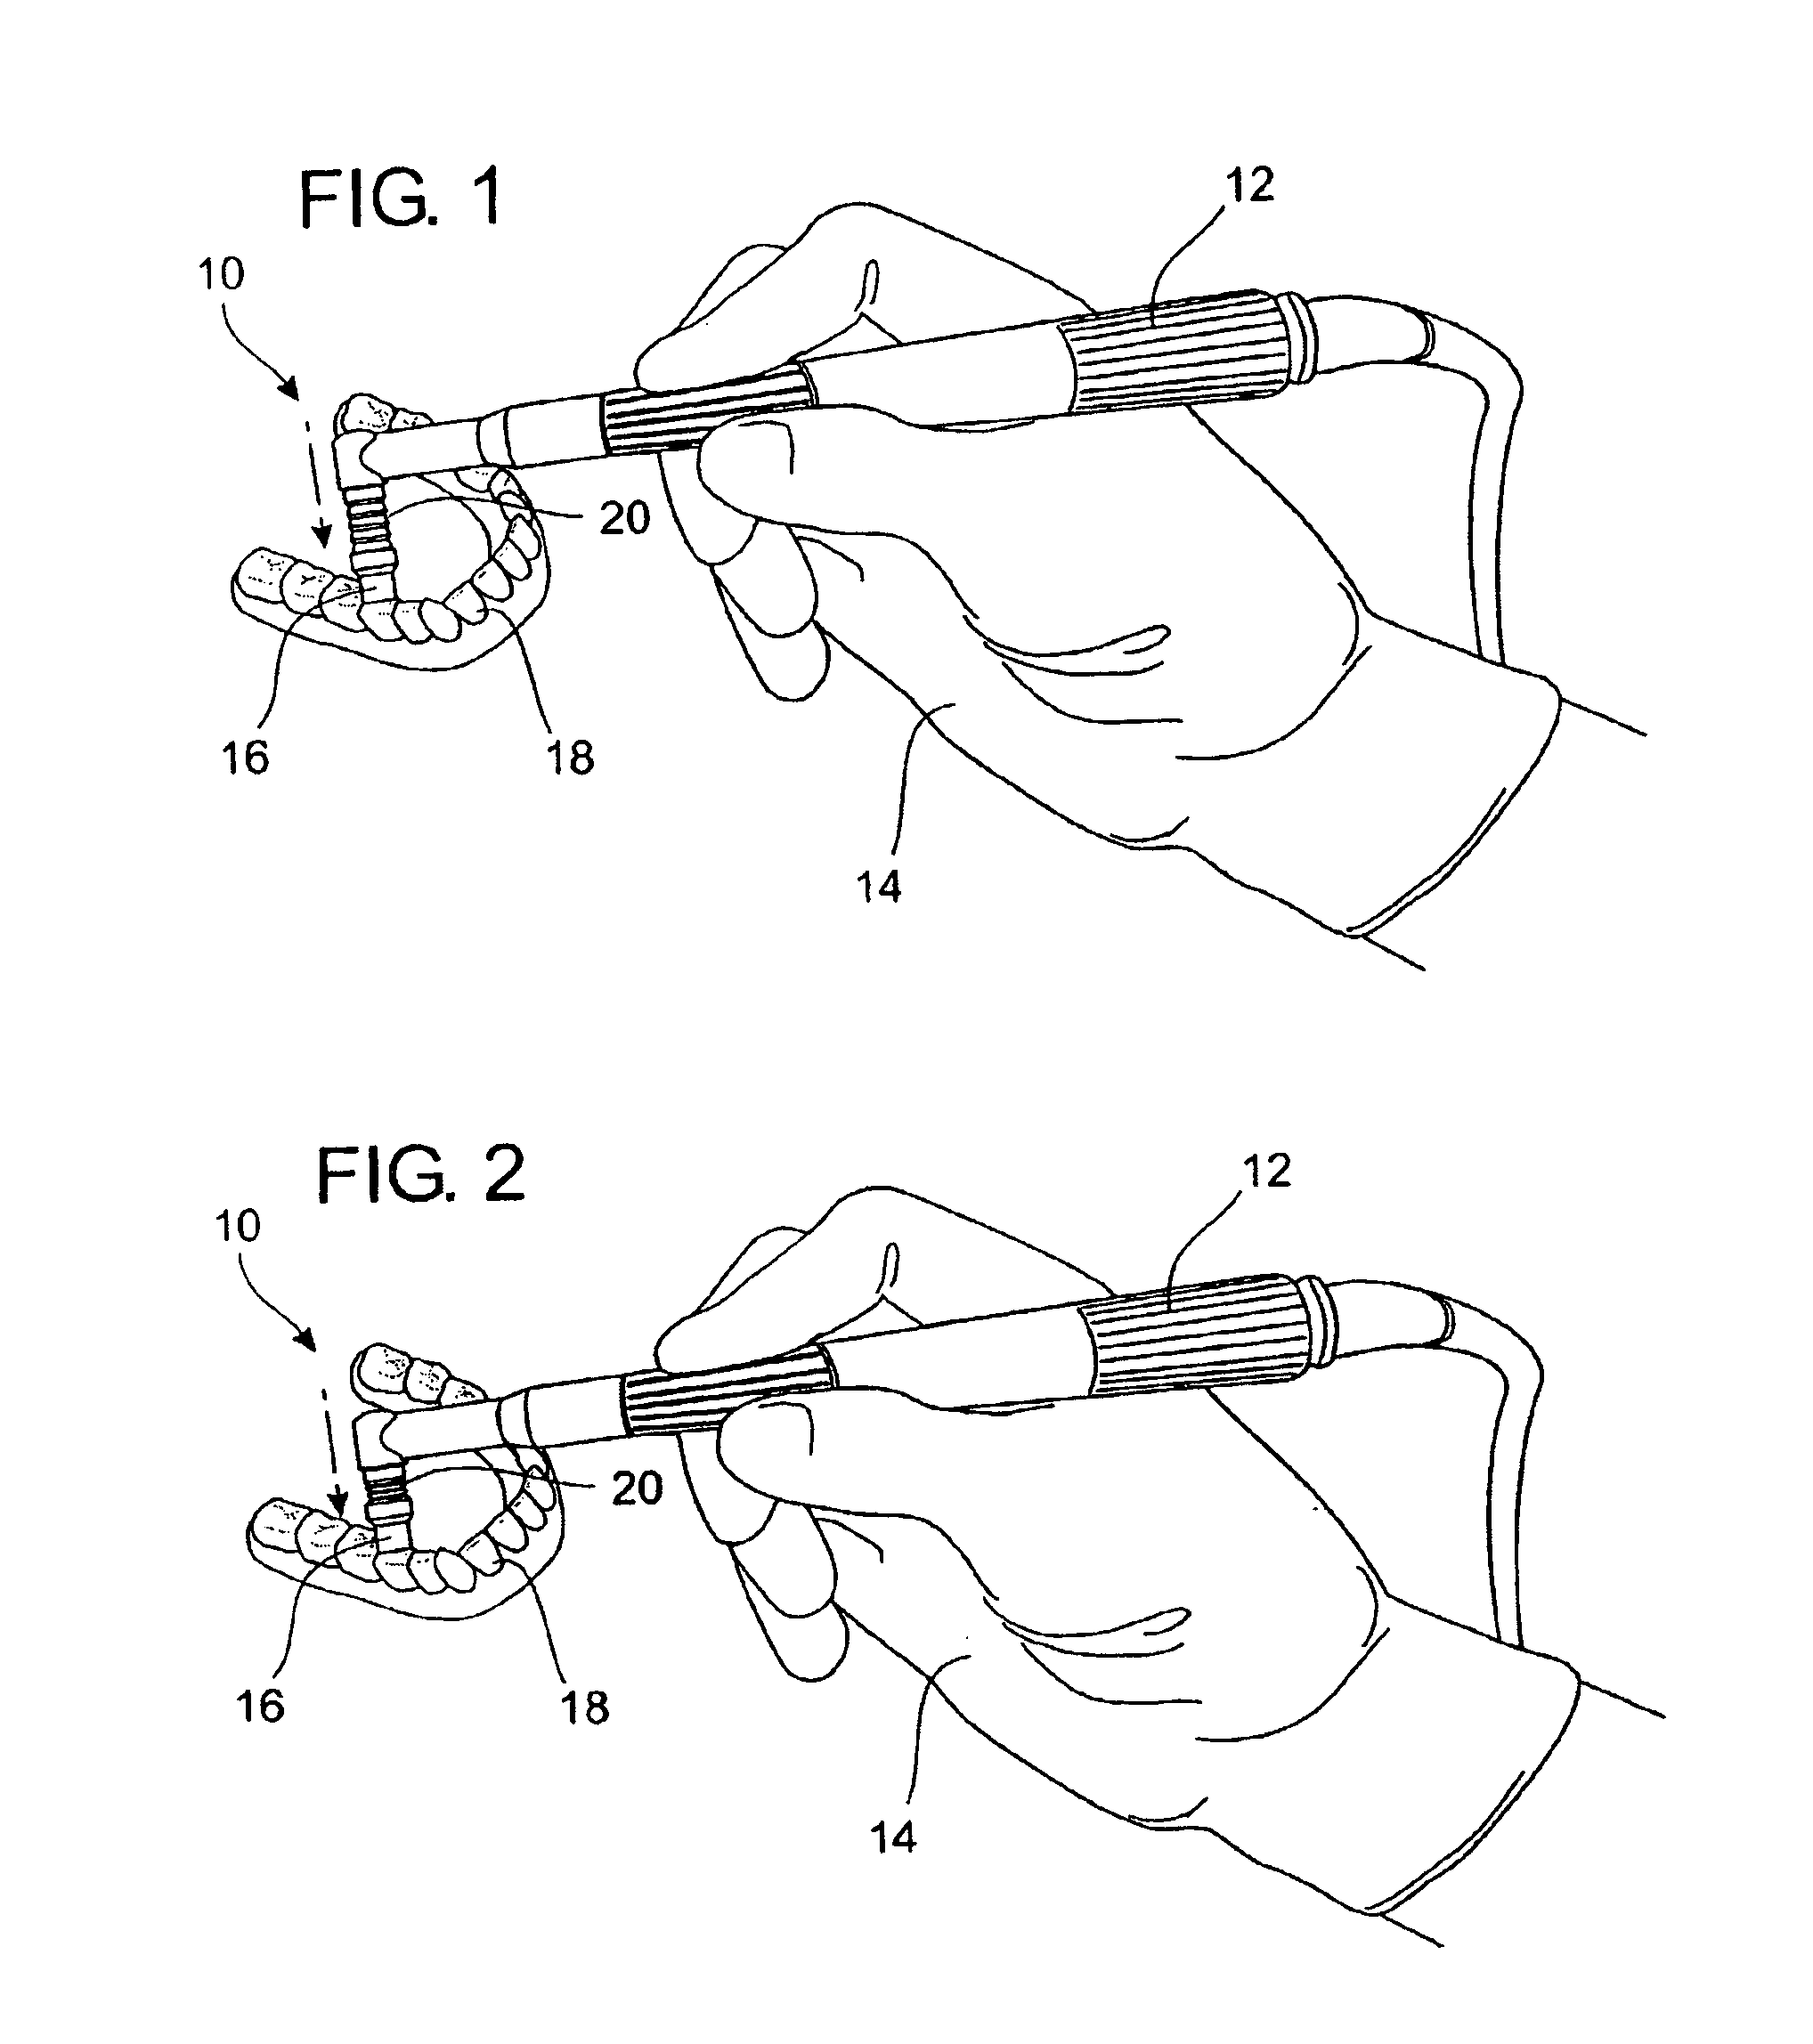 Combination rotating dental cleaning brush and paste device